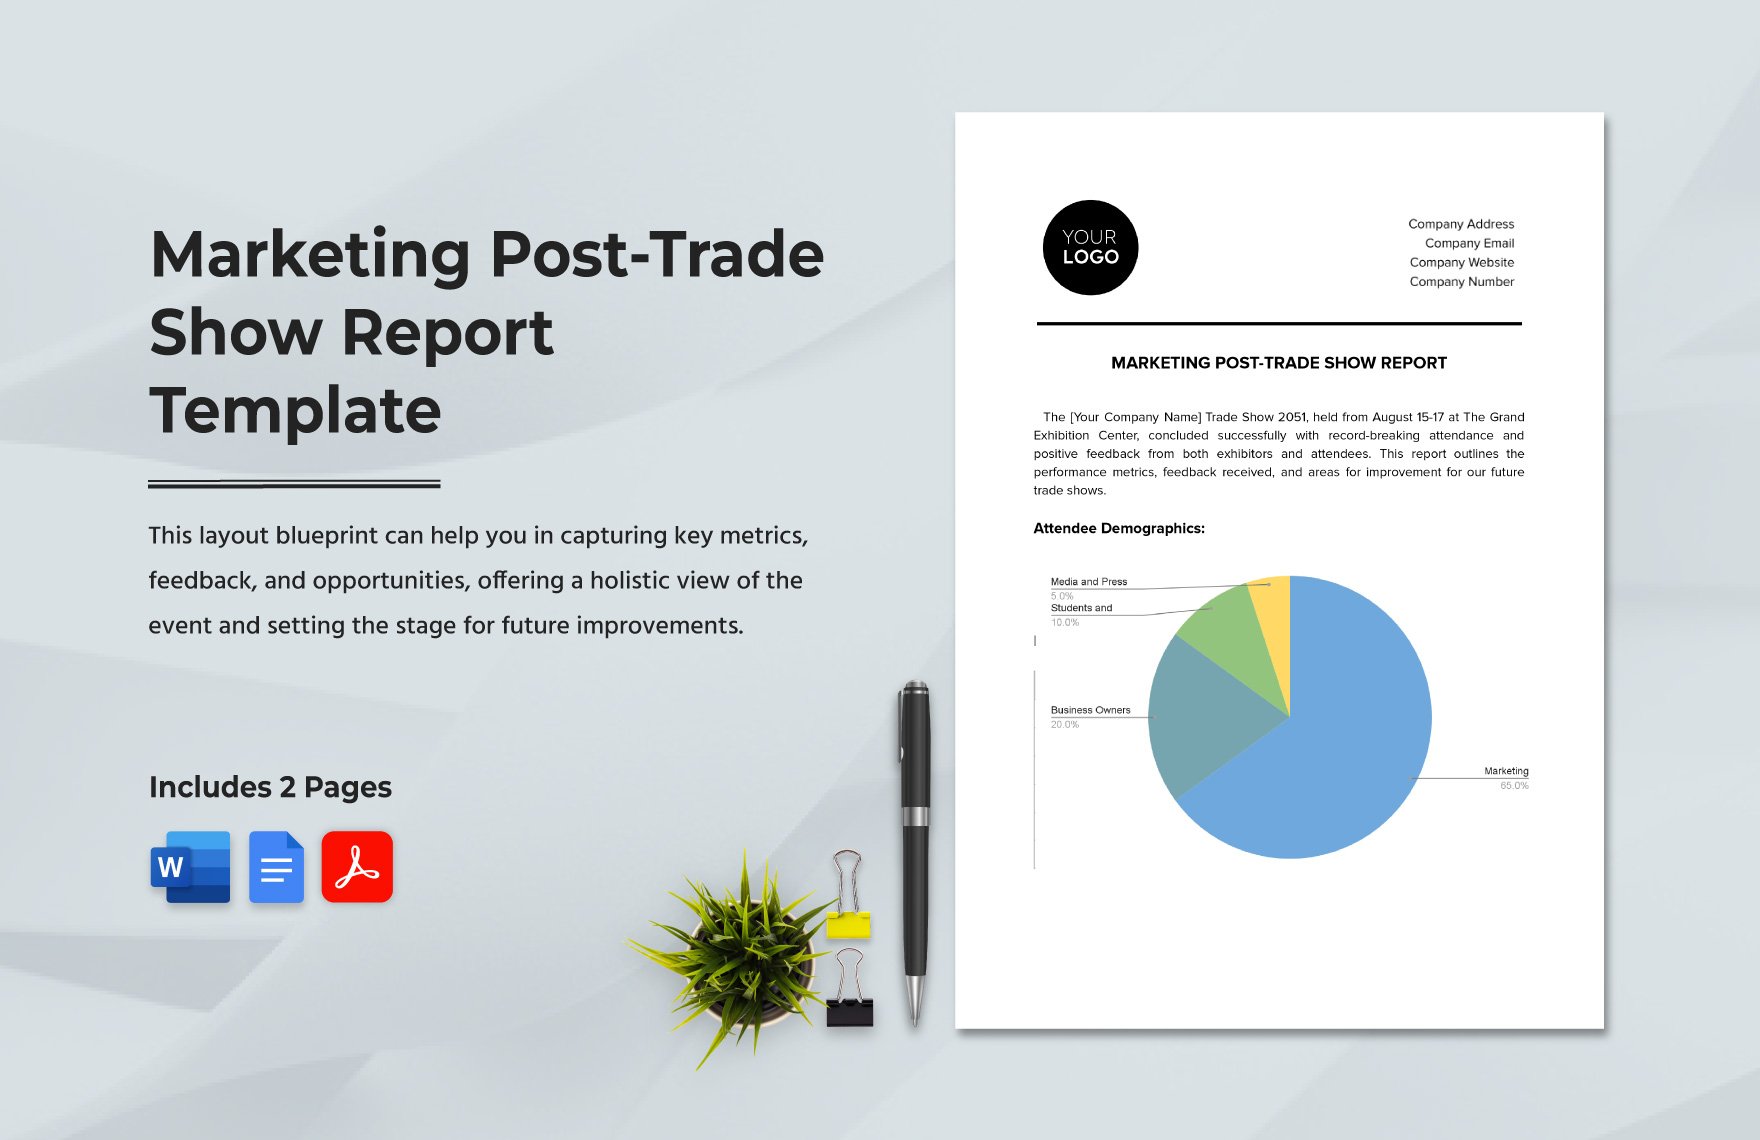 Marketing Post-Trade Show Report Template